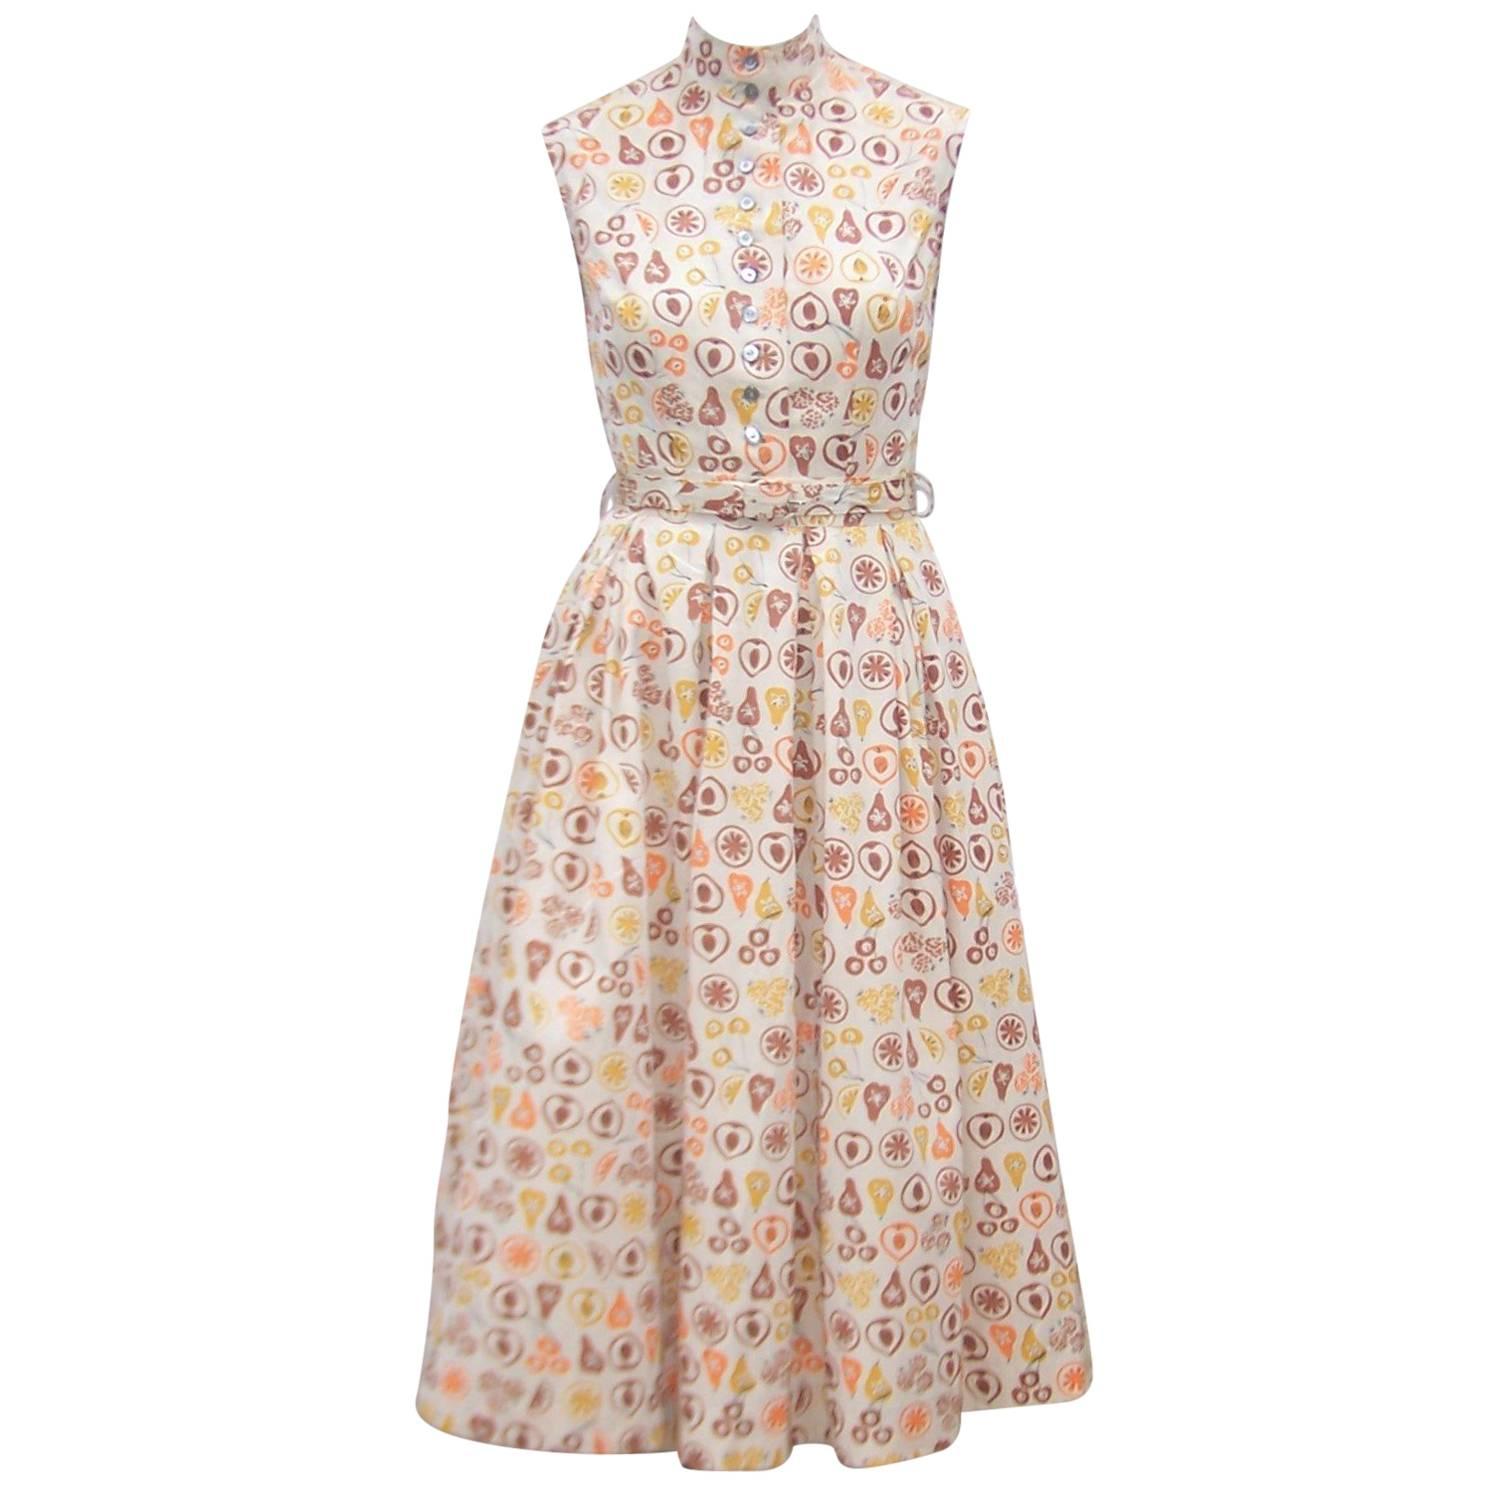 Adorable 1950's Two Piece Dress Set With Fruit Print